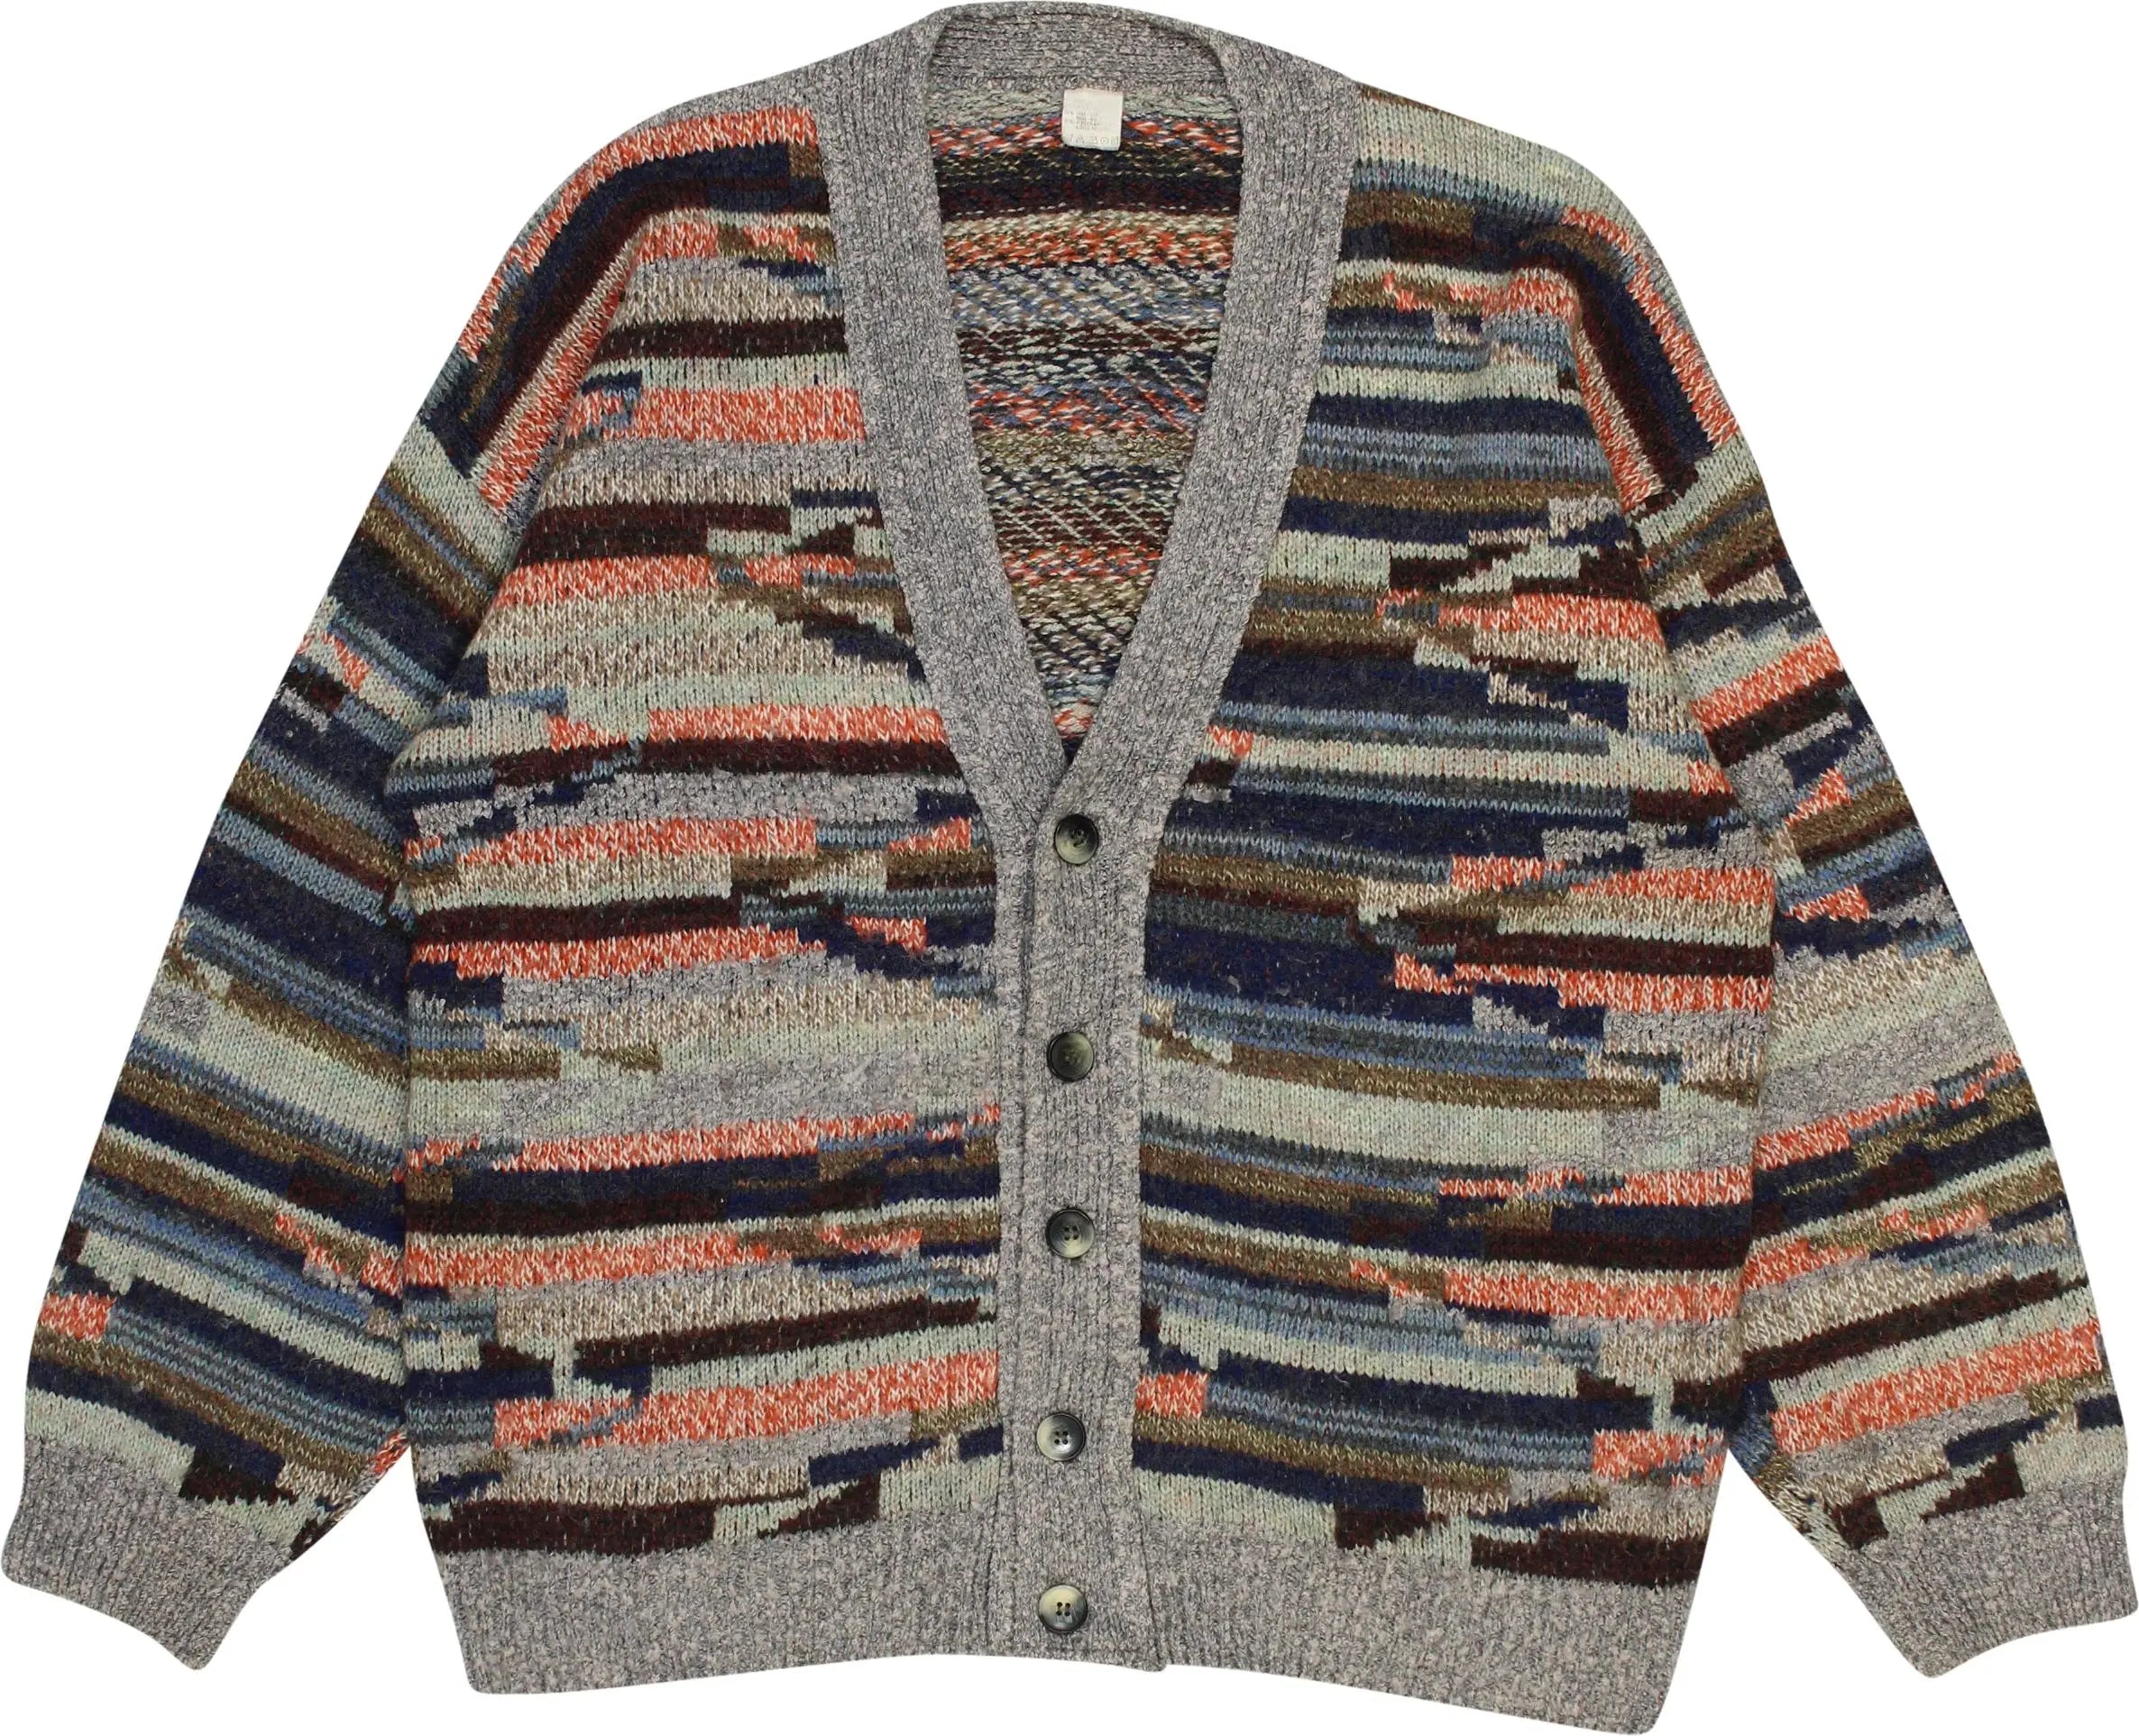 Unknown - 90s Wool Blend Cardigan- ThriftTale.com - Vintage and second handclothing